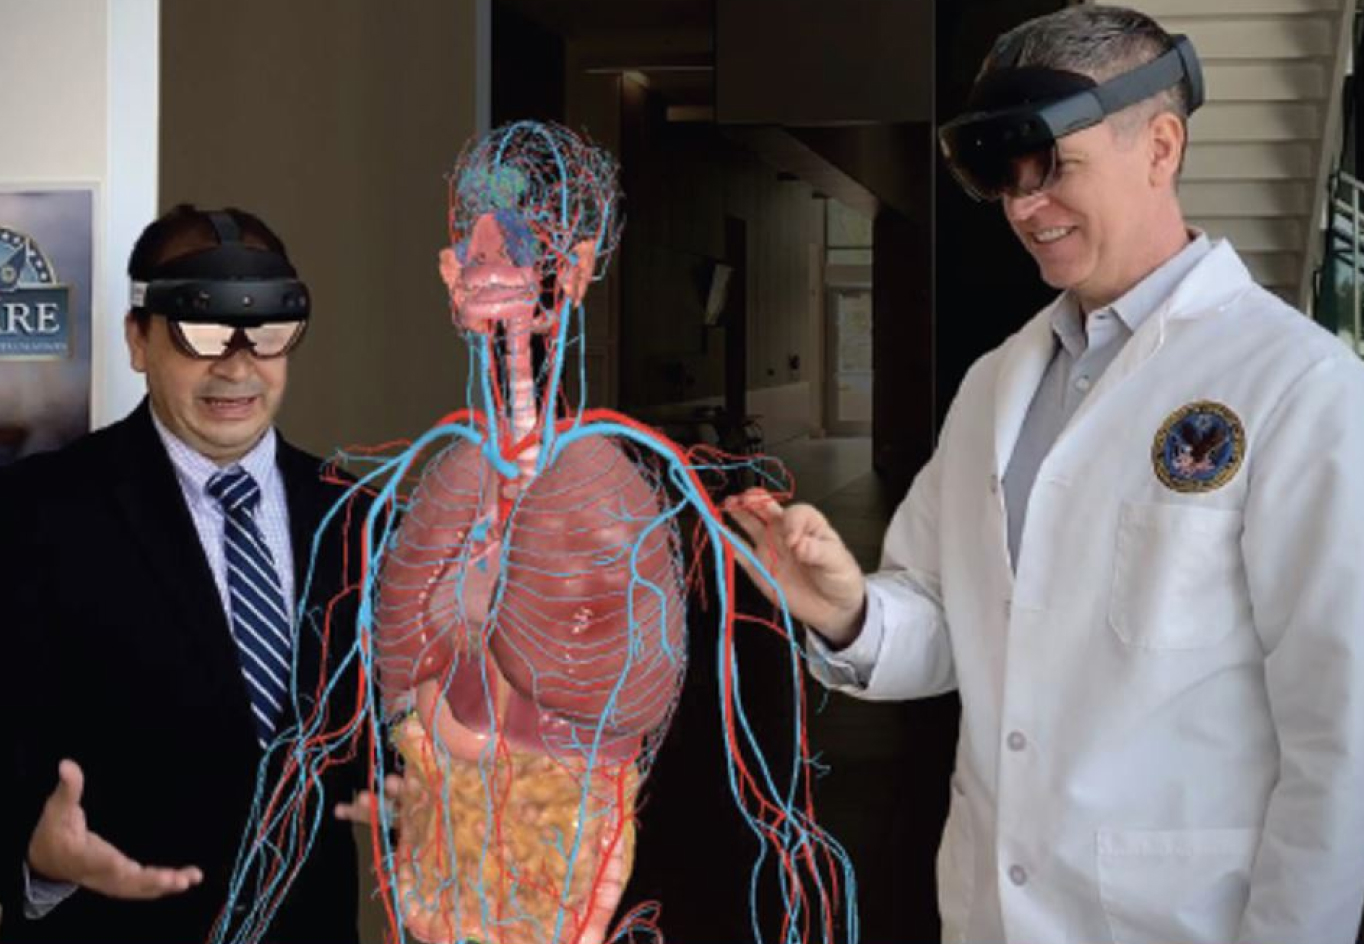 Medical professionals working with AR to visualize the human heart, lungs, and blood vessels